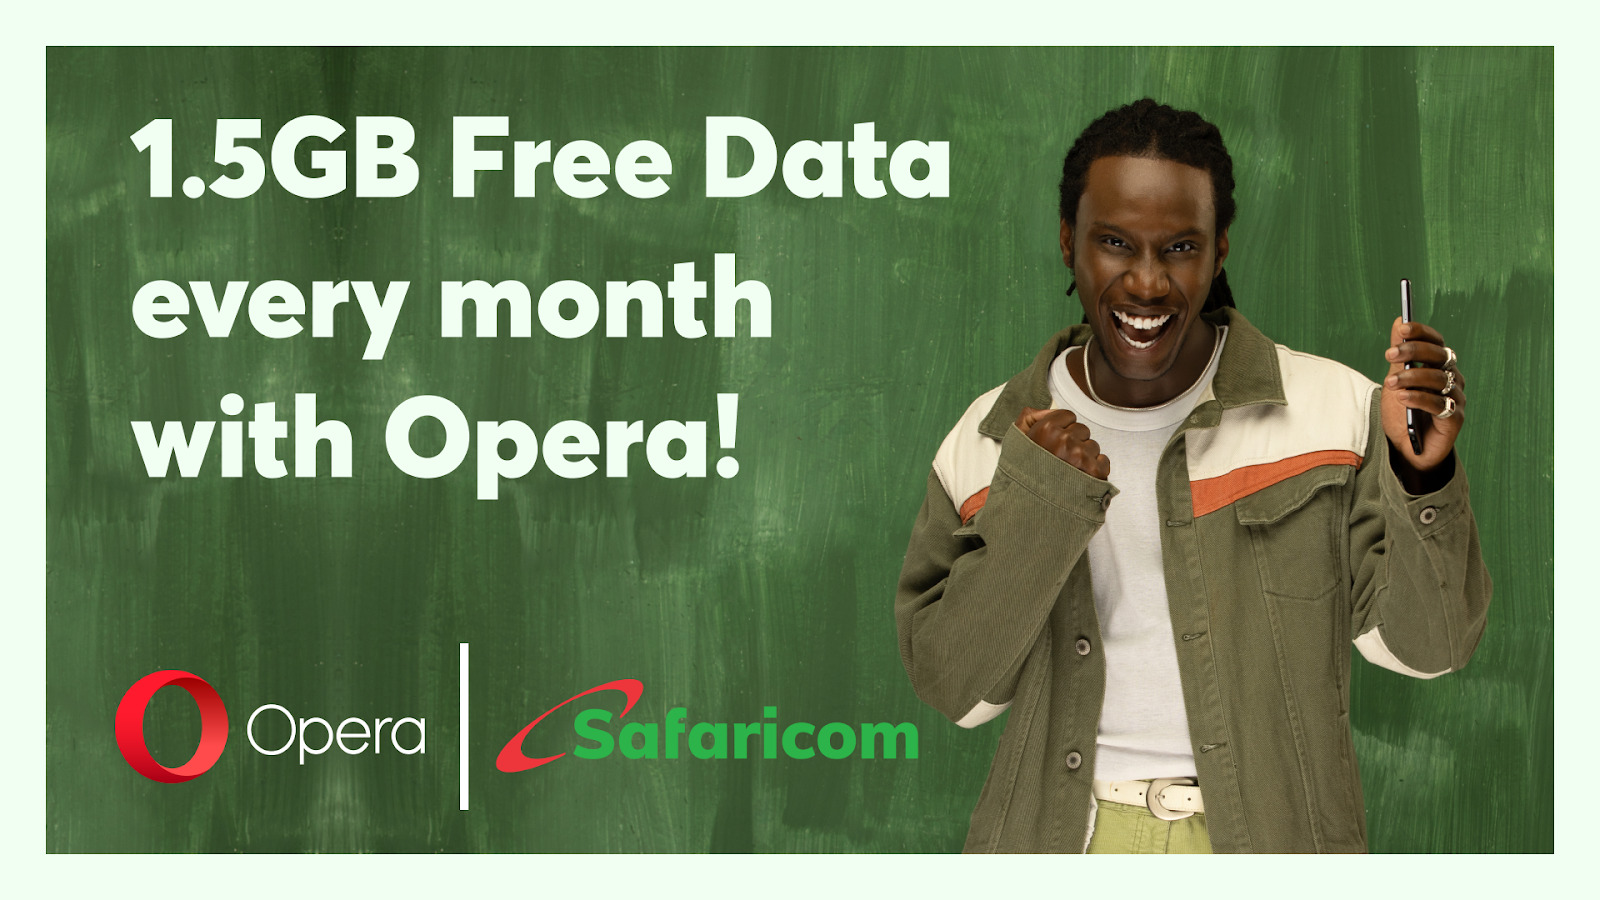 An Opera user is excited to save with the upcoming free data campaign.